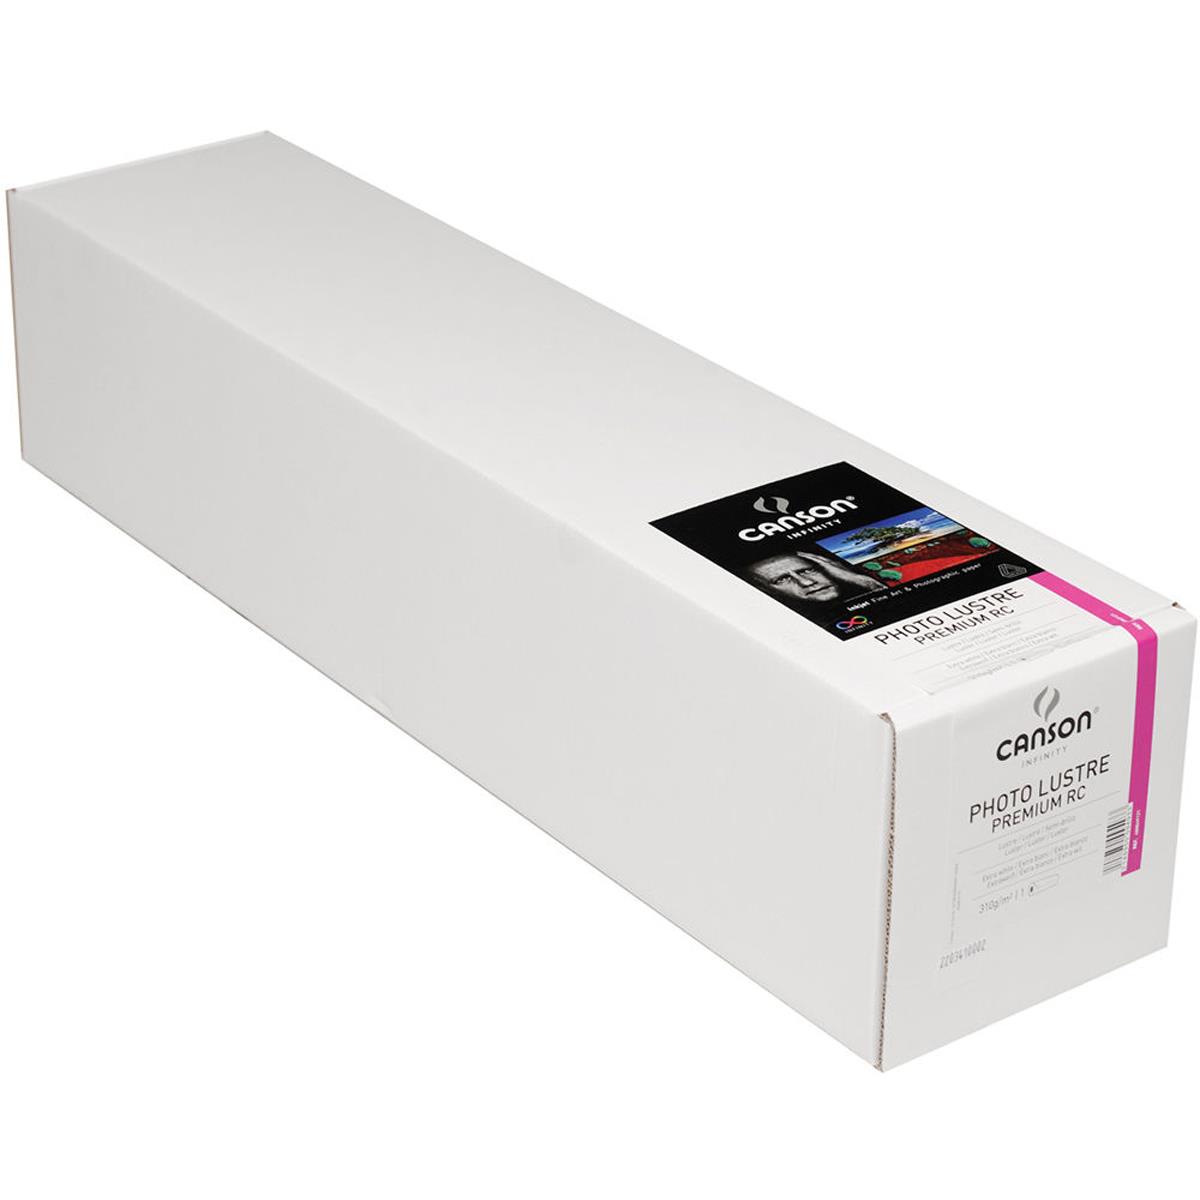 Image of Canson Infinity Lustre Premium RC Luster Photo Paper(24&quot;x82' Roll)